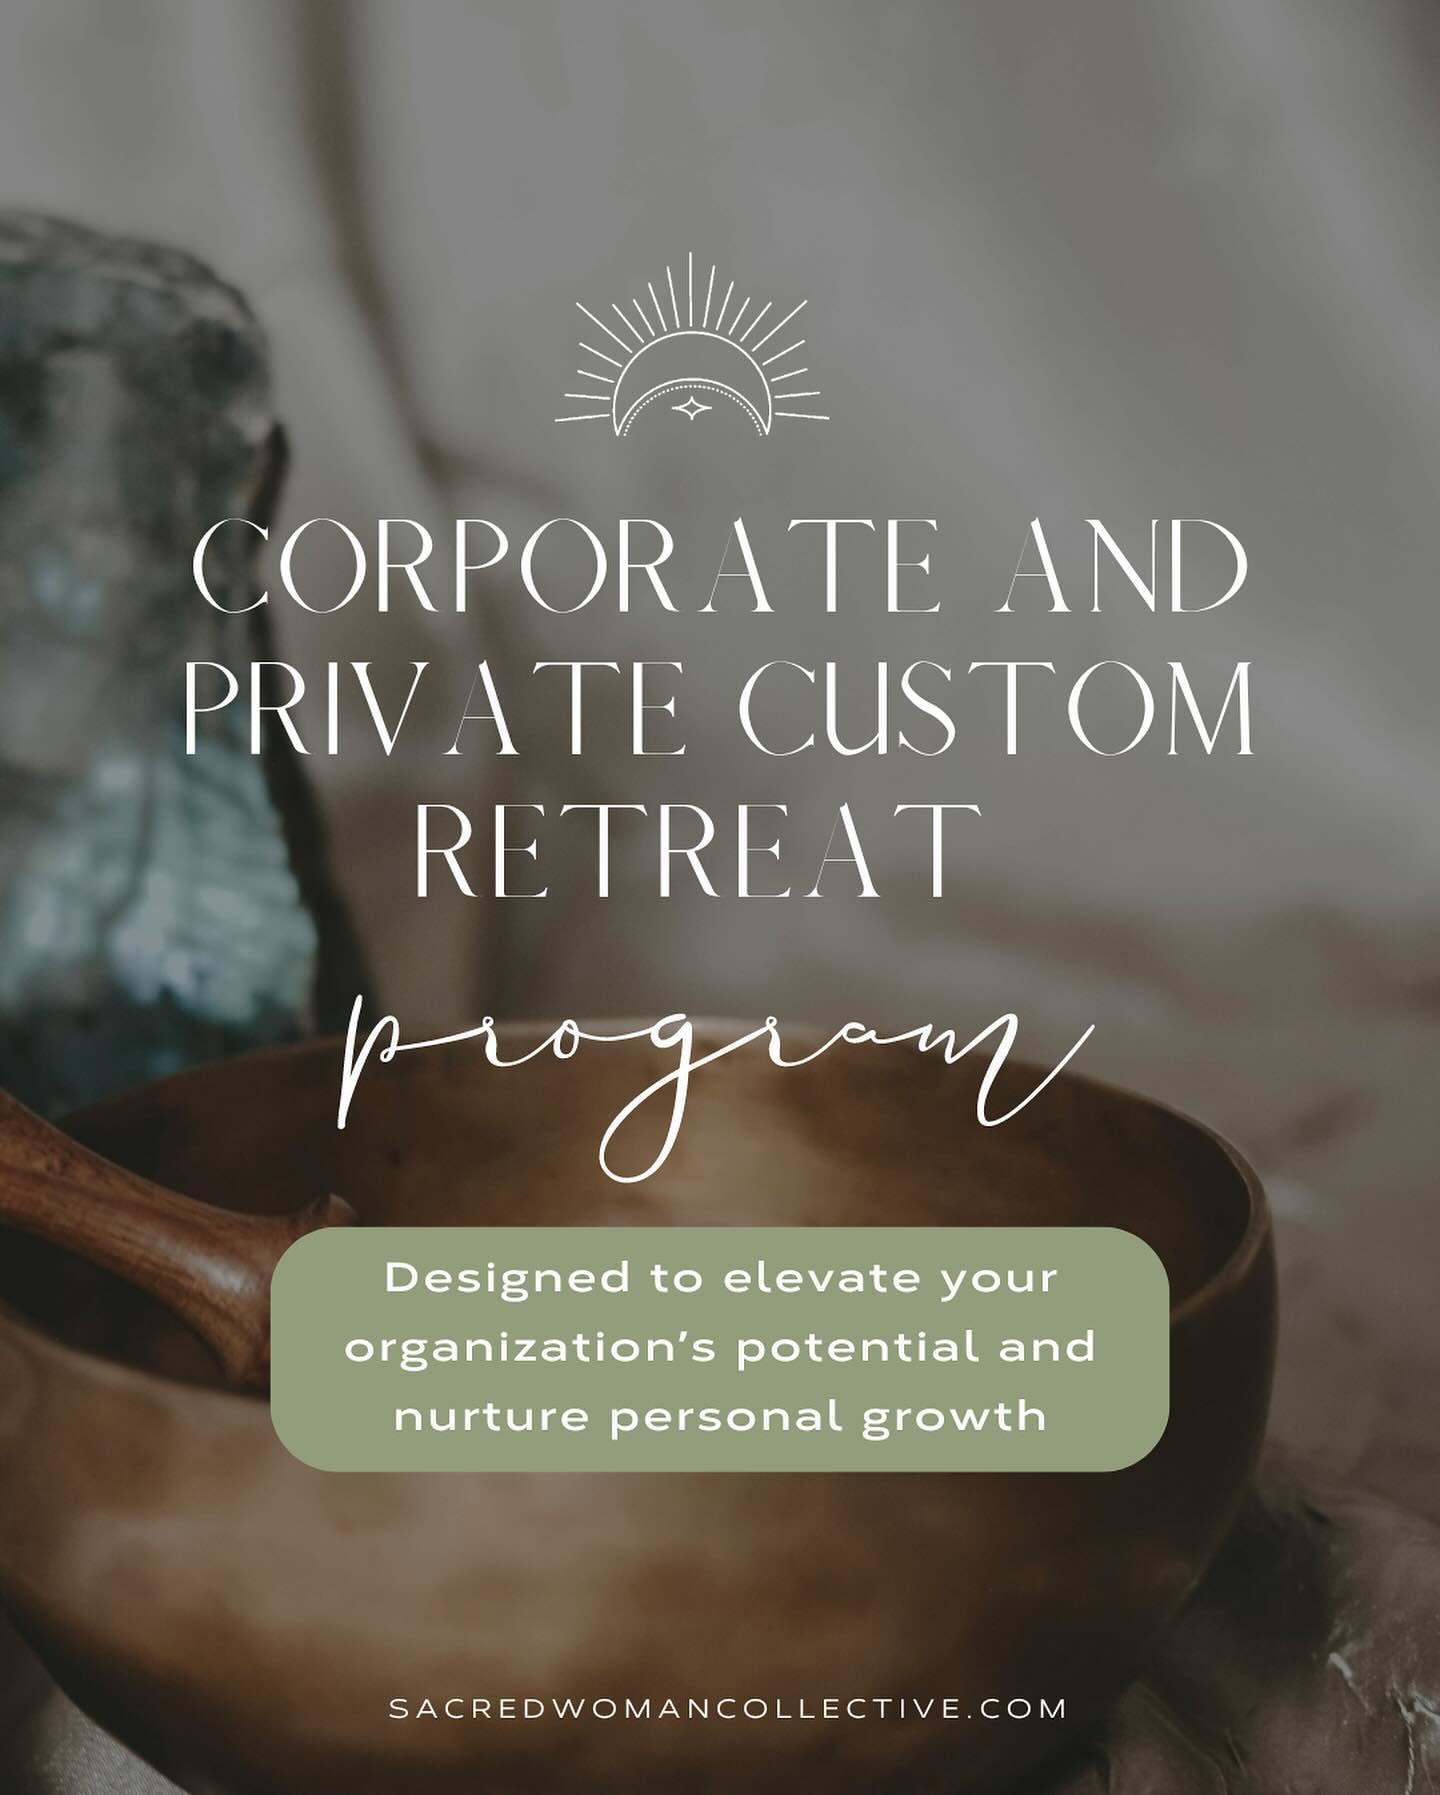 Private, custom, corporate. You choose. The point is that we all need it, even the ones who think it&rsquo;s woo woo. Let me share a little story. We host an annual corporate retreat for a company based in Maryland, it&rsquo;s an optional retreat for